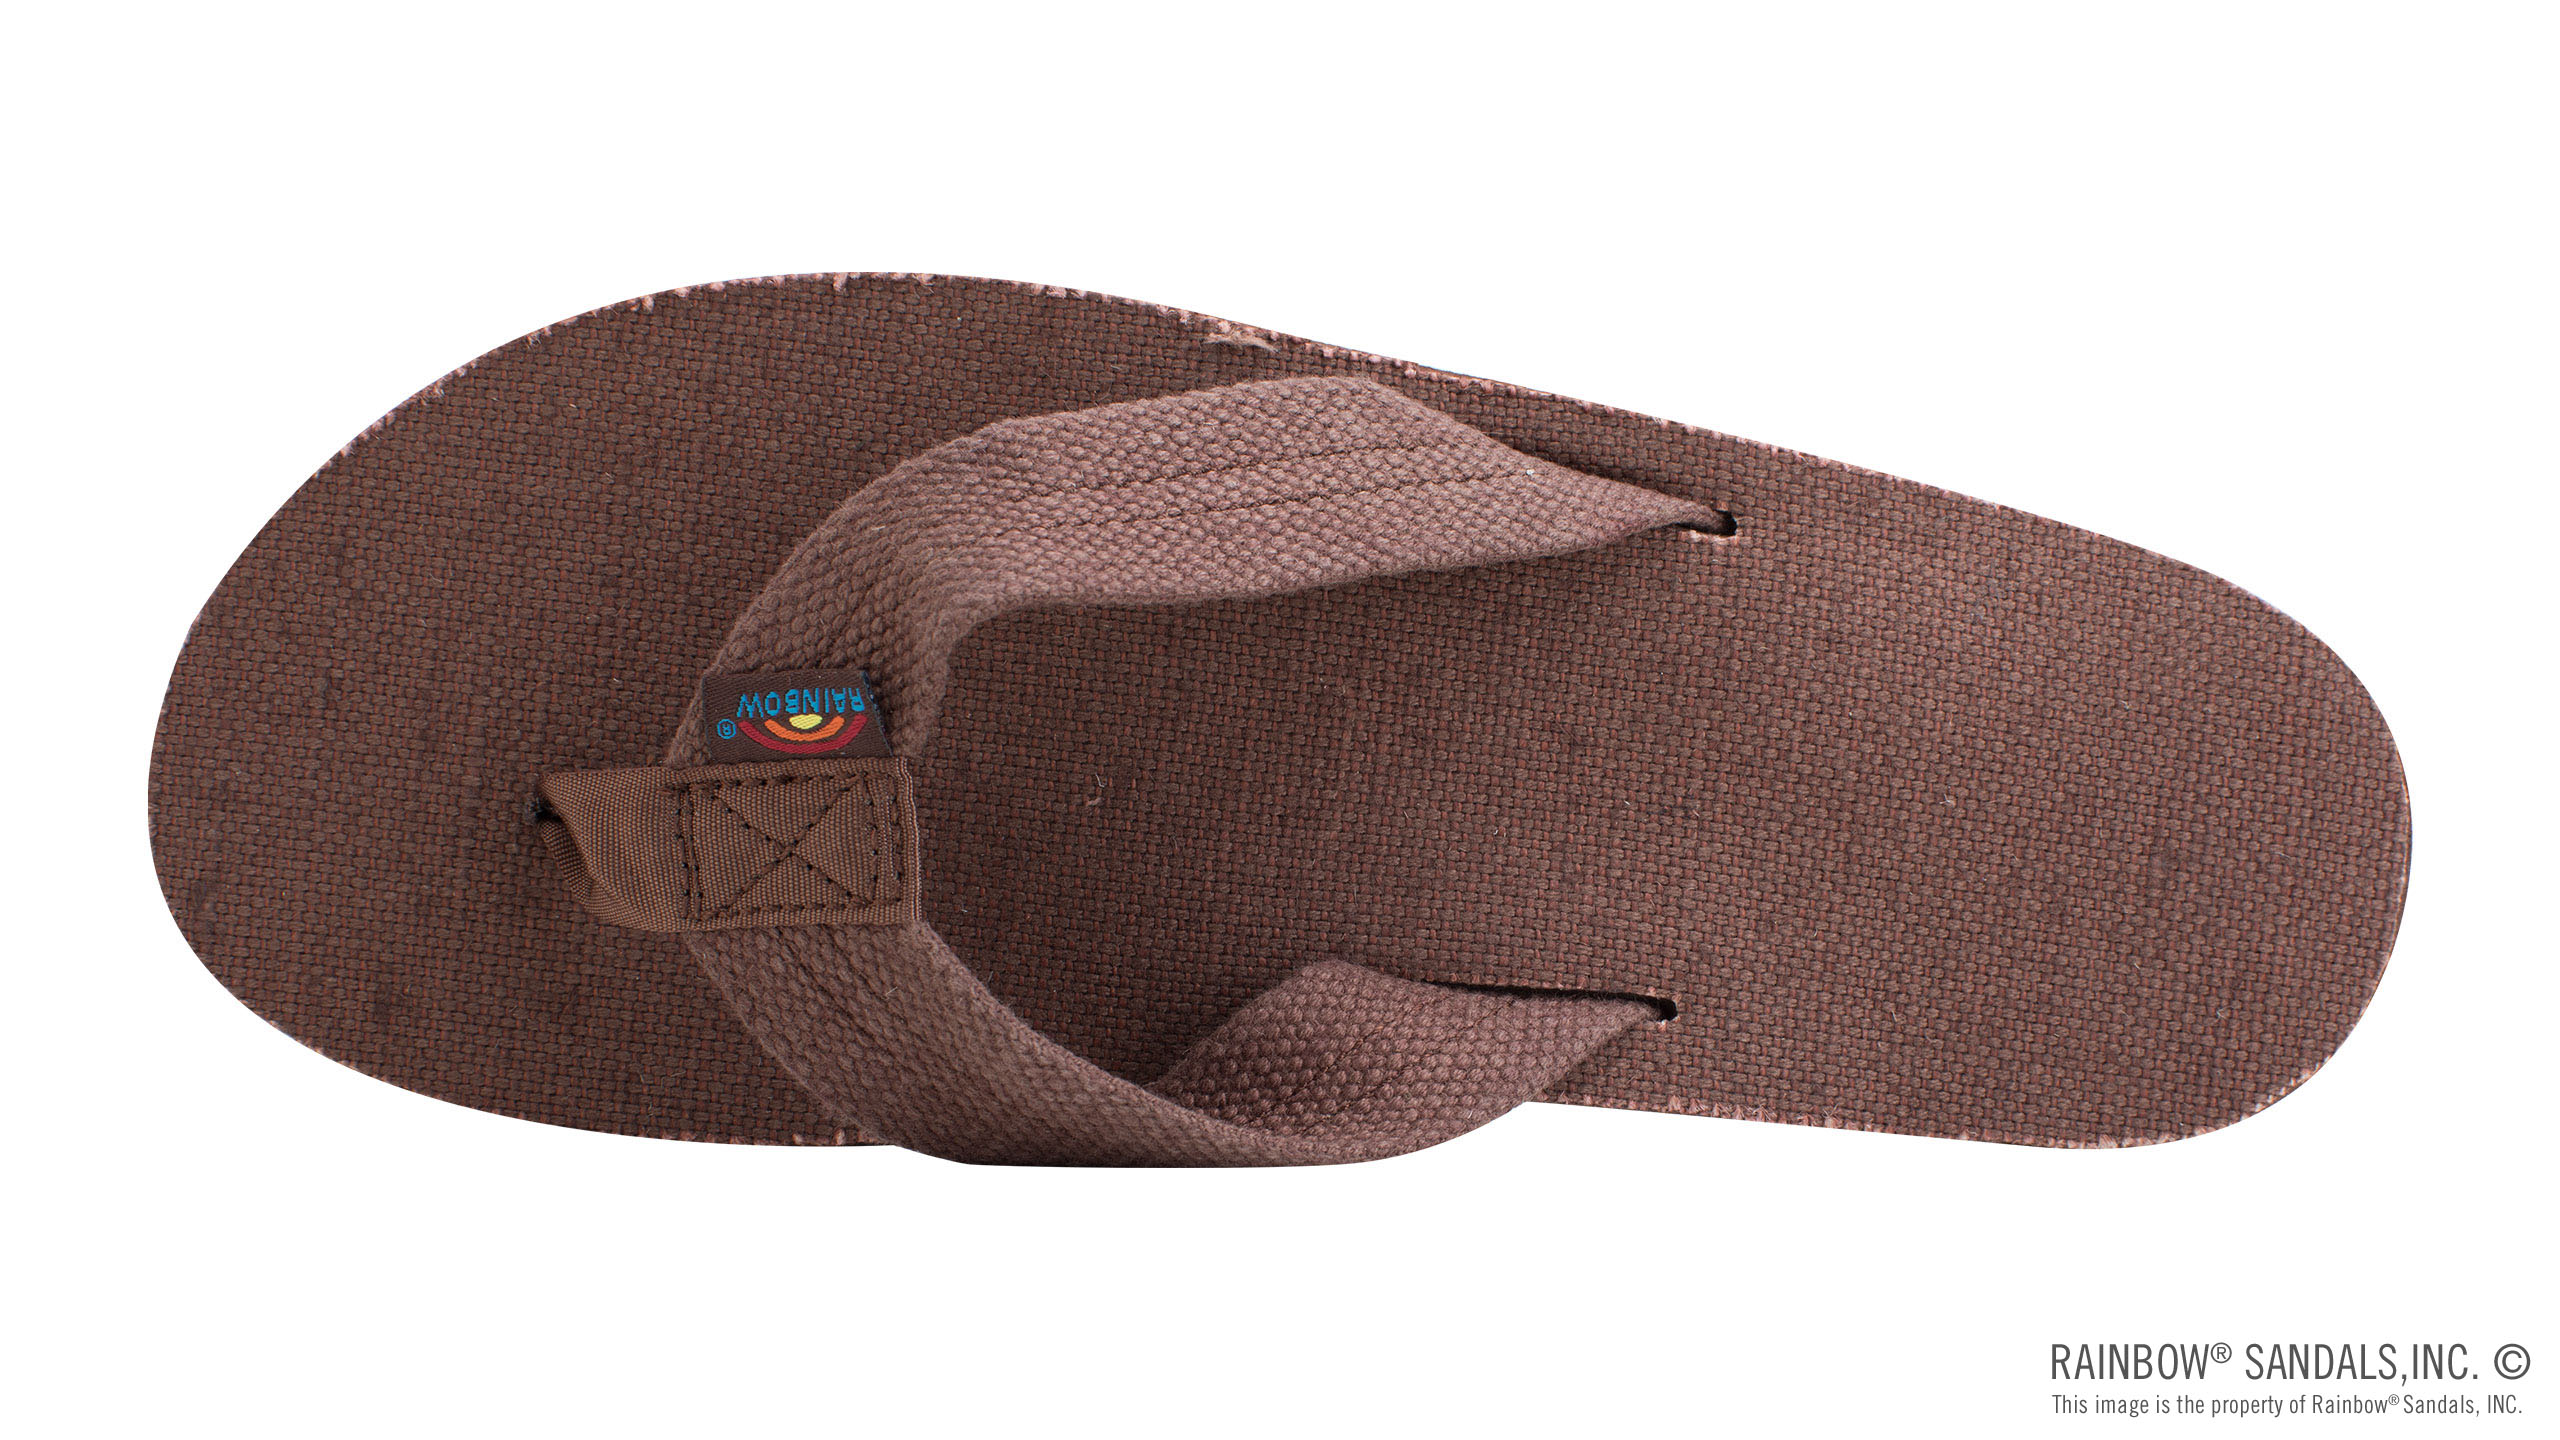 Rainbow Hemp & Canvas Sandals - Had these for almost 12 years and